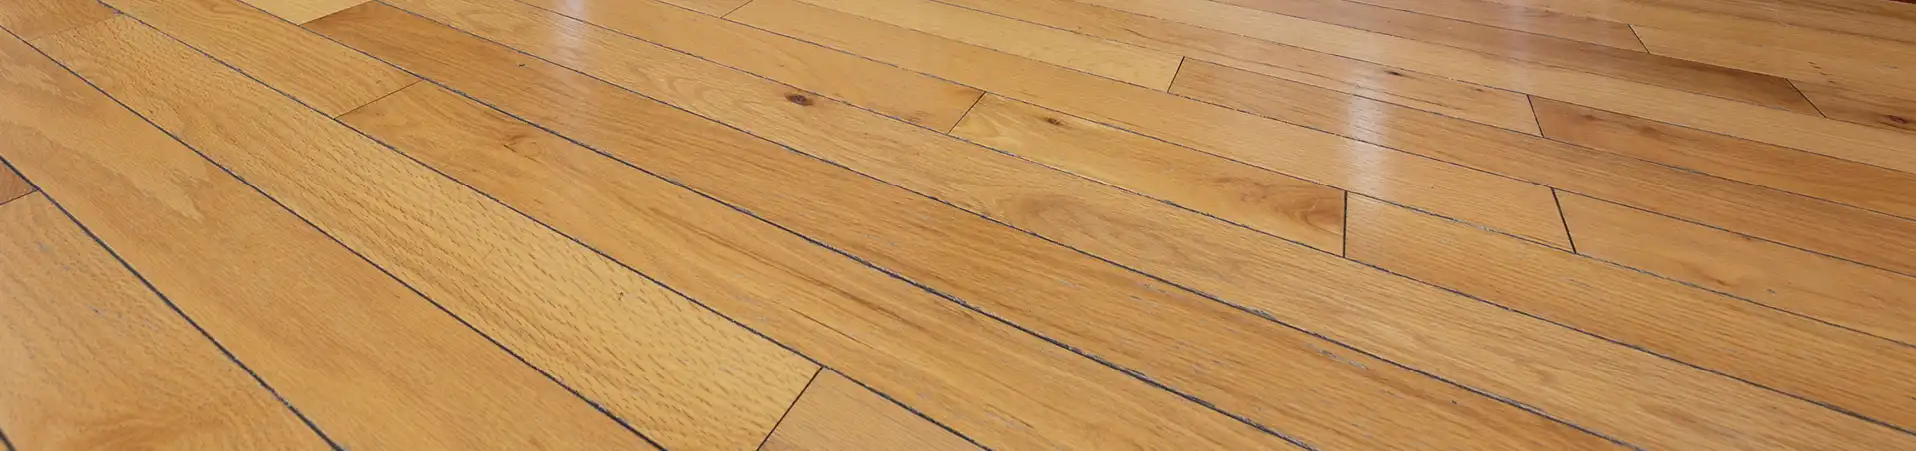 Photo of worn out wood floor